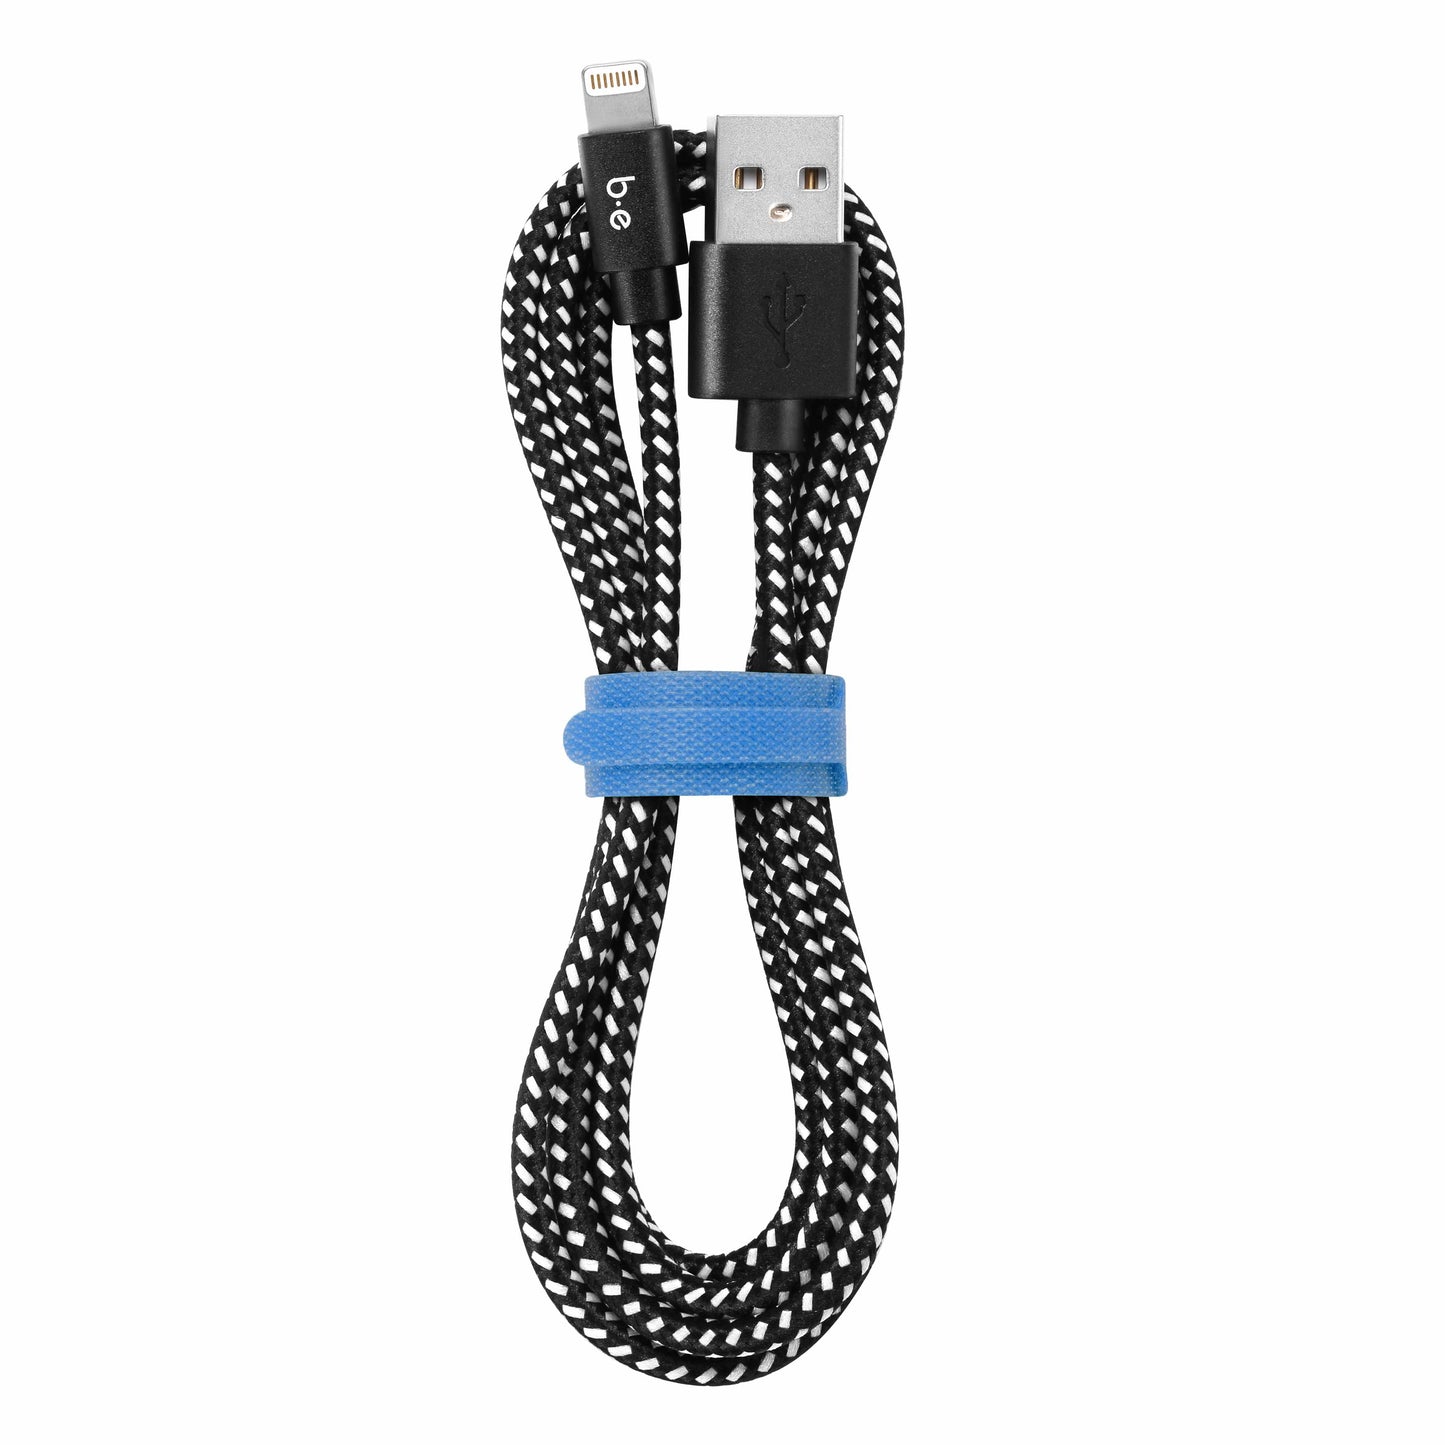 Braided Charge/Sync Lightning to USB Cable 6ft Zebra